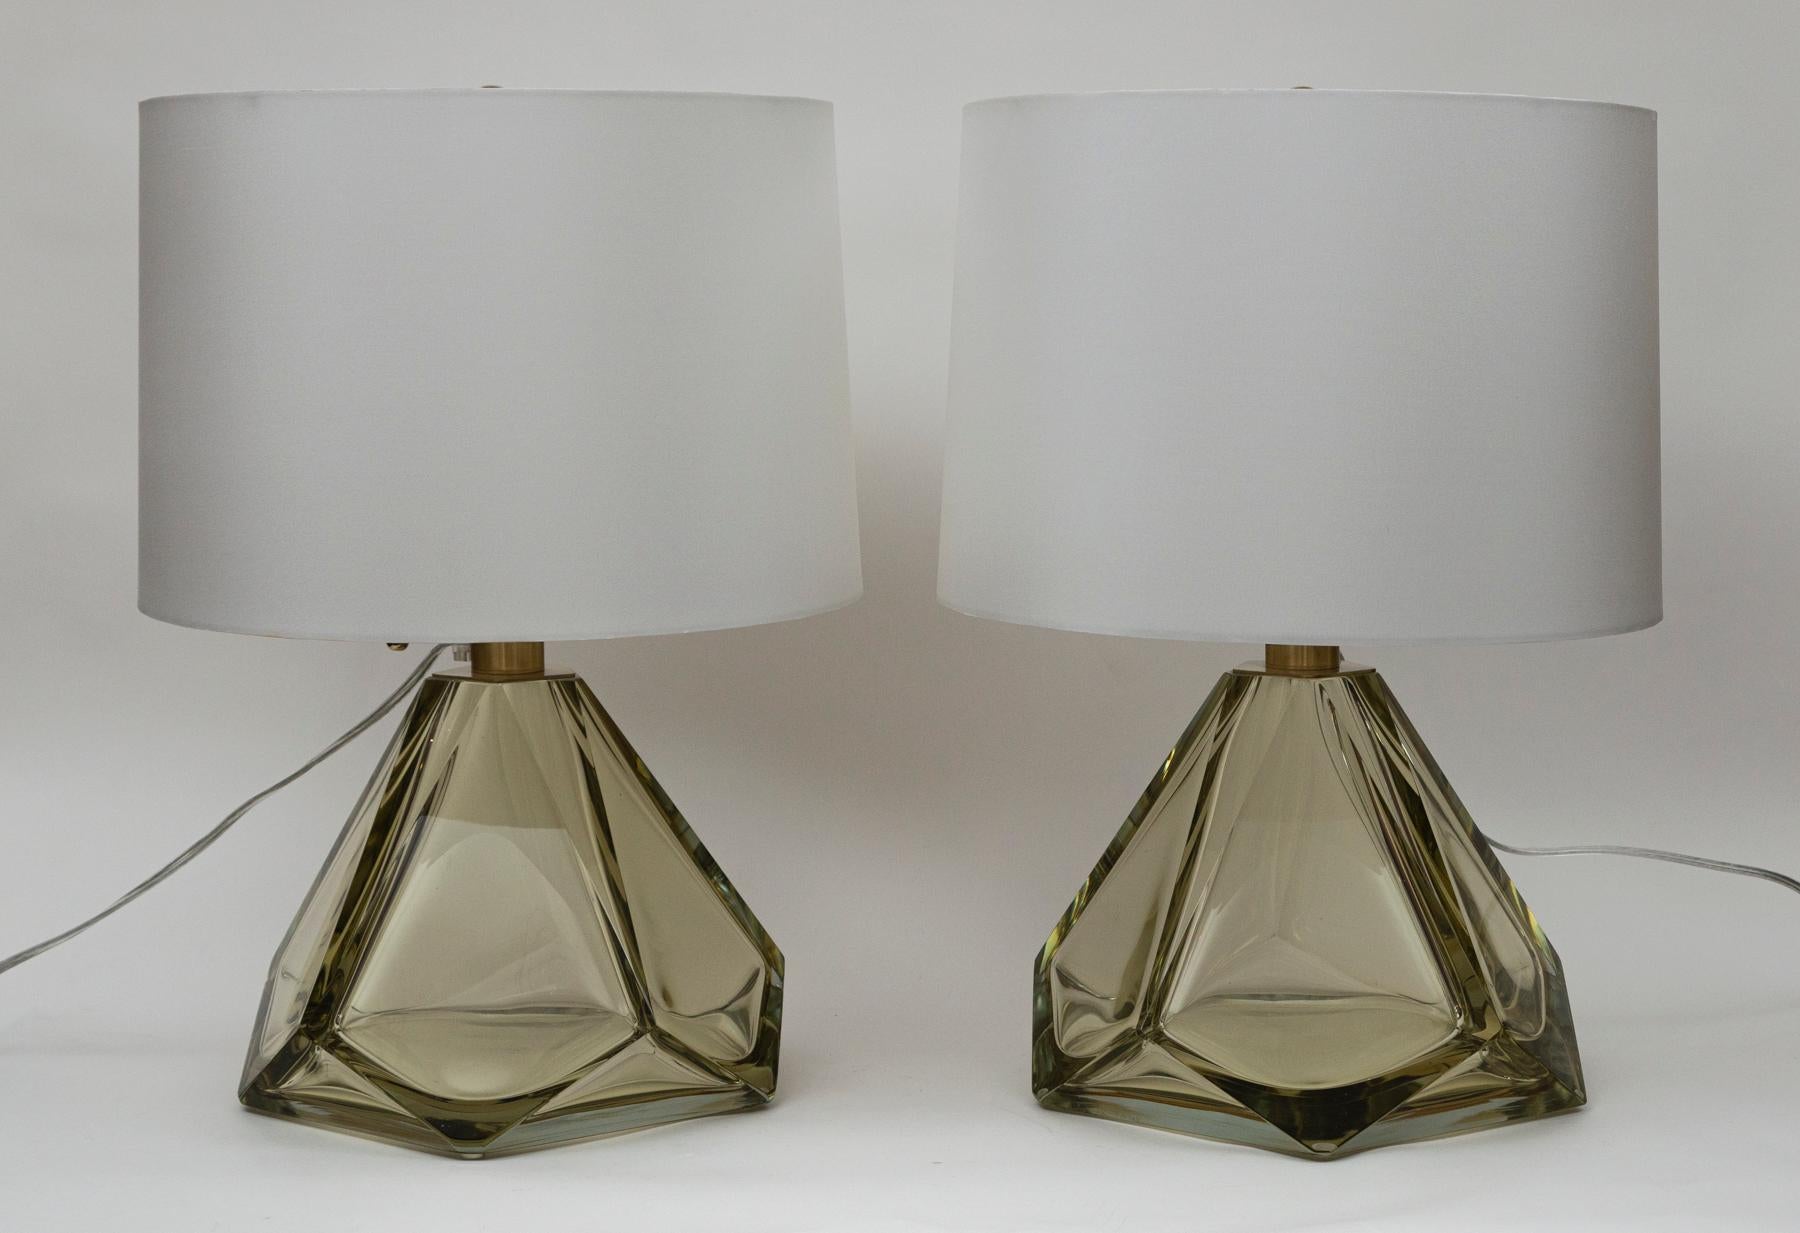 Modern Artisan blown and polished diamond faceted lamps in a stunning citrine tone, note these are glass enclosed at the base
Electrified to code with UL approved parts, hardware in  polished nickel on brass with pull chains  for 2 medium base bulbs